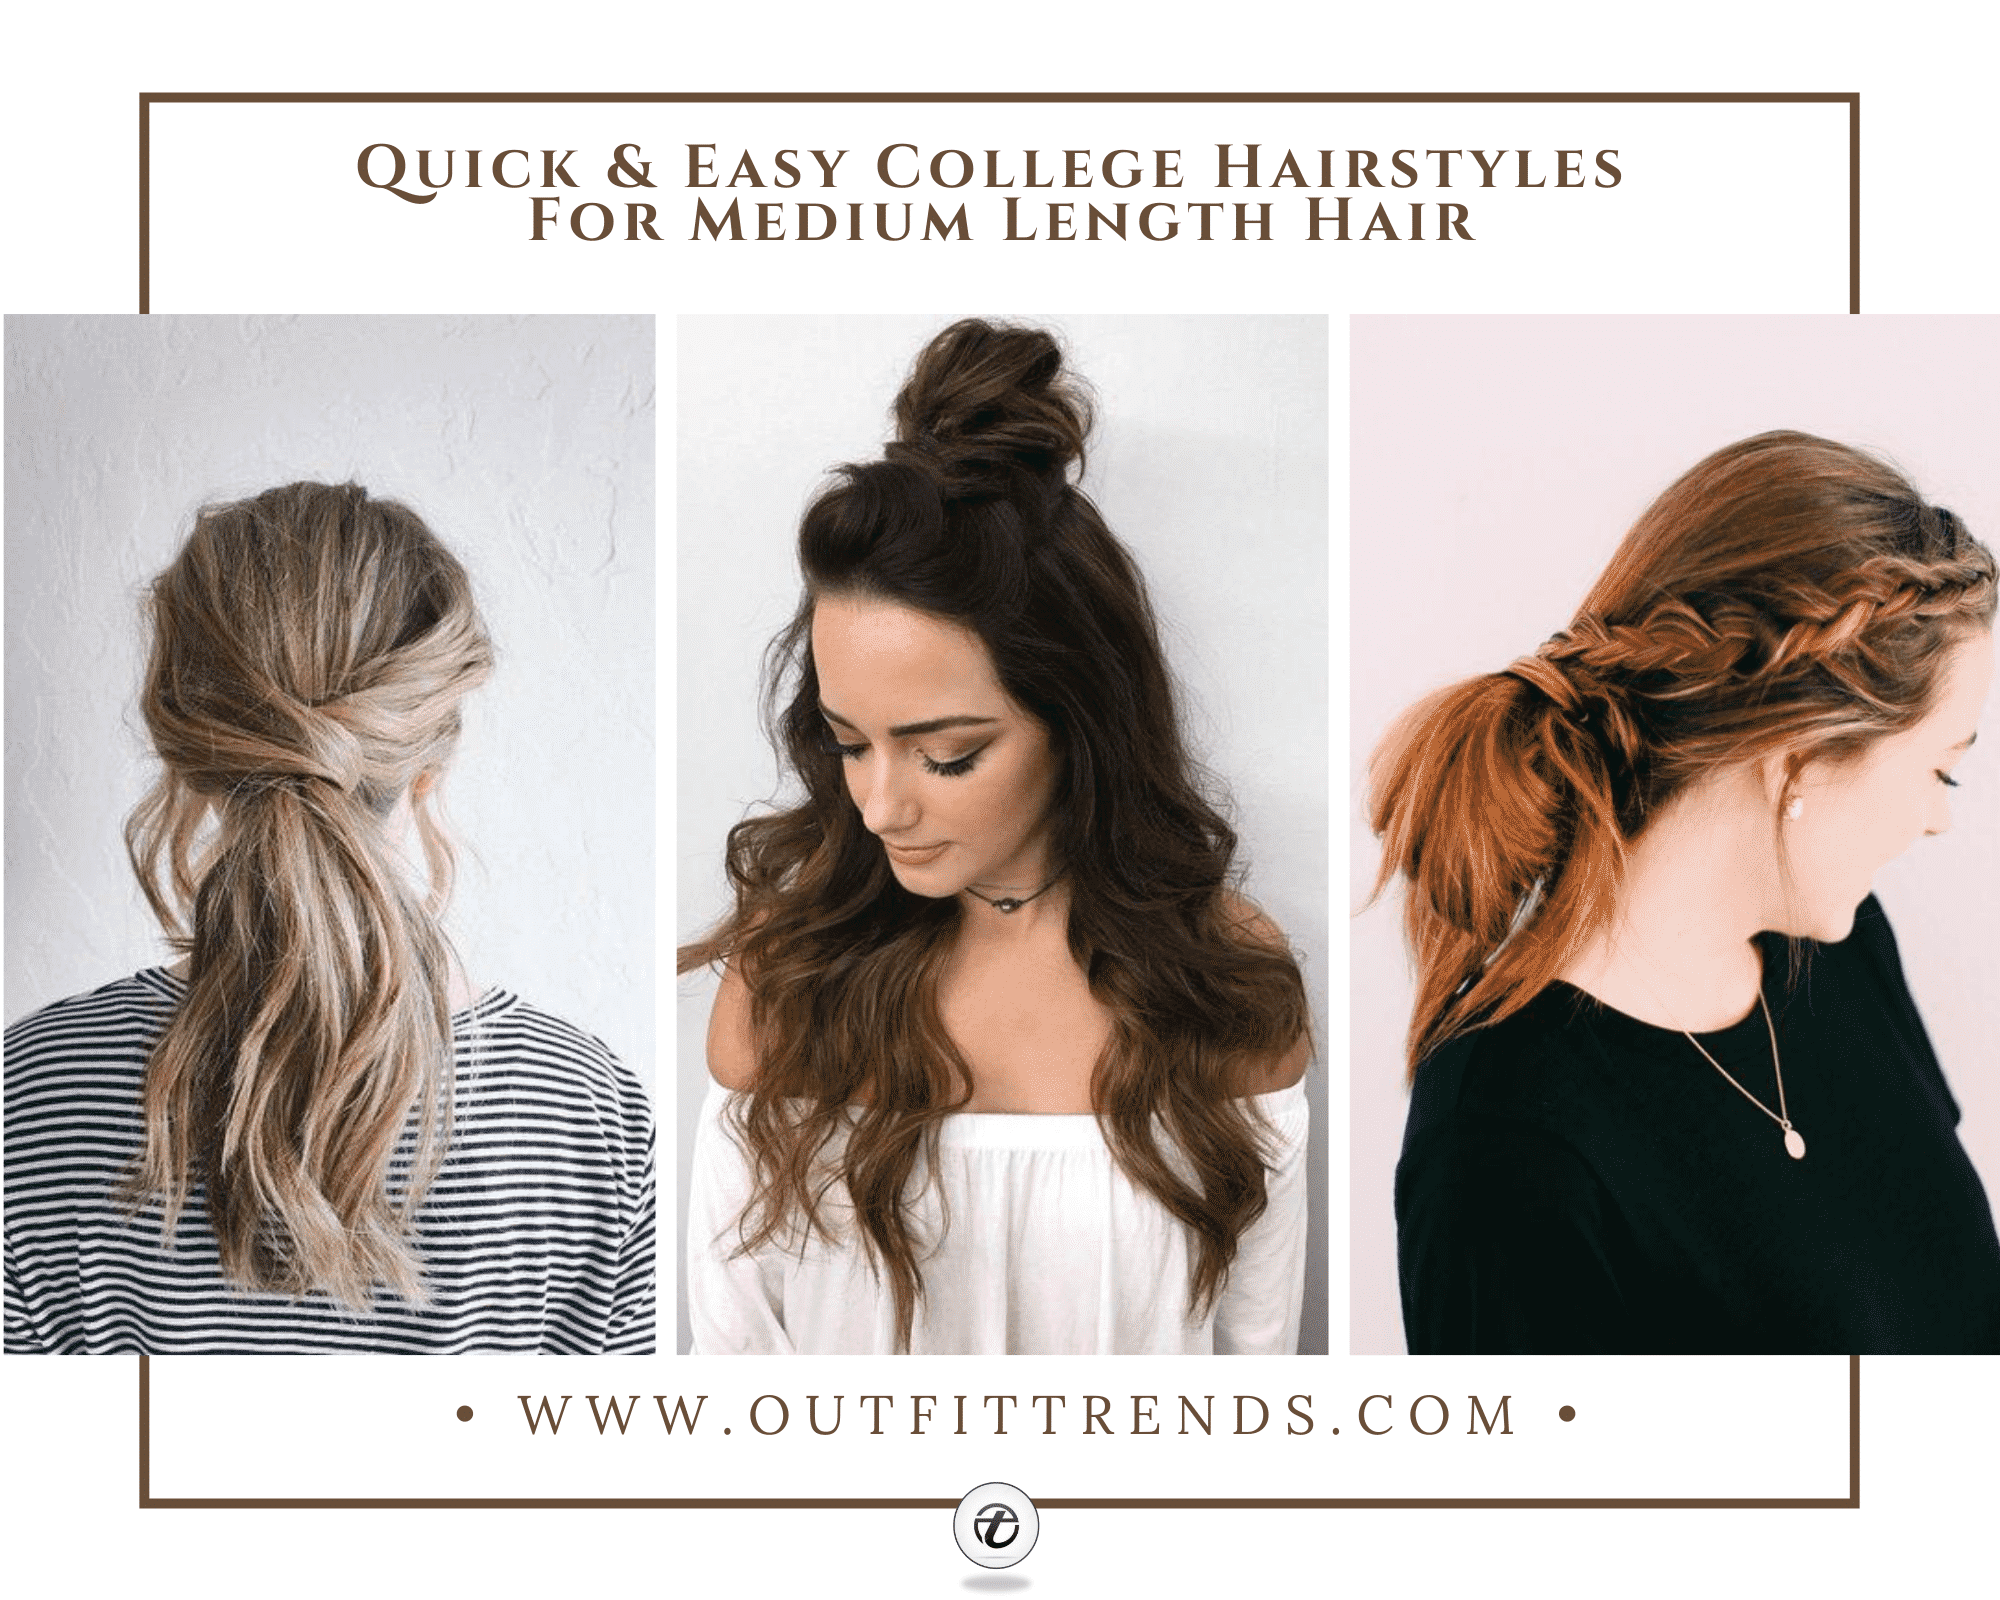 The Ultimate Guide to the Perfect Interview Hairstyles | Uloop